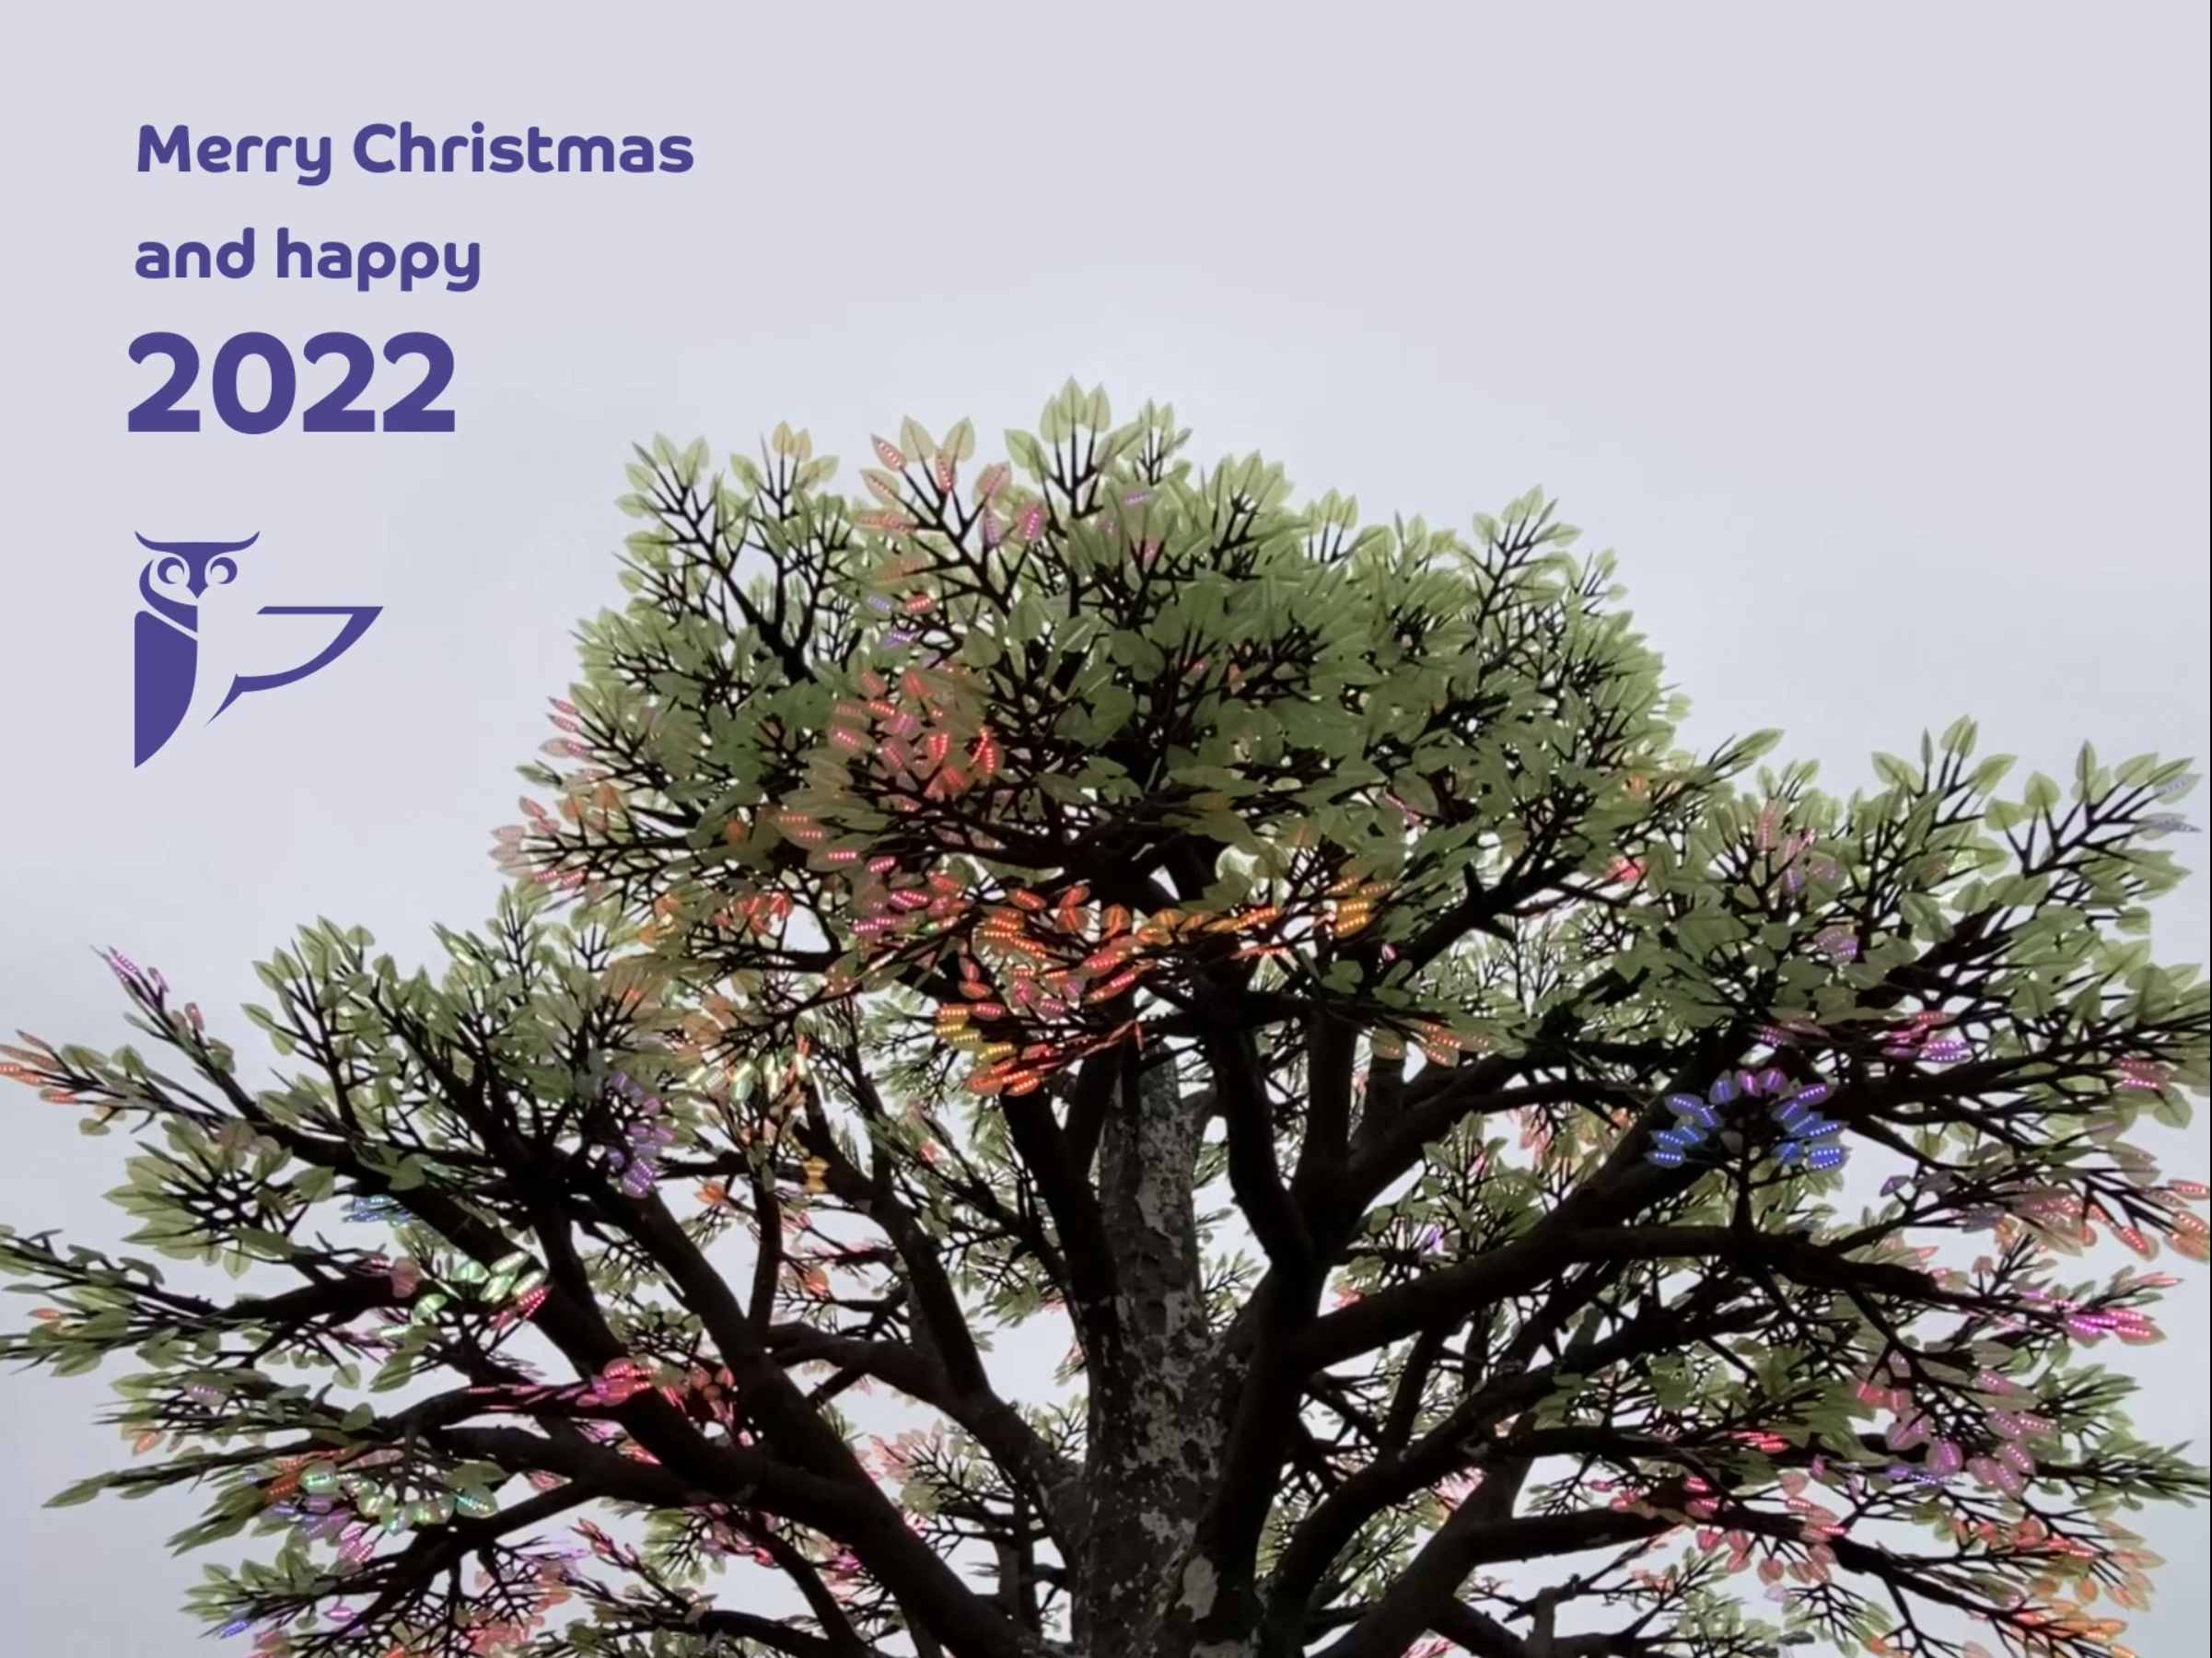 MERRY CHRISTMAS AND HAPPY 2022!